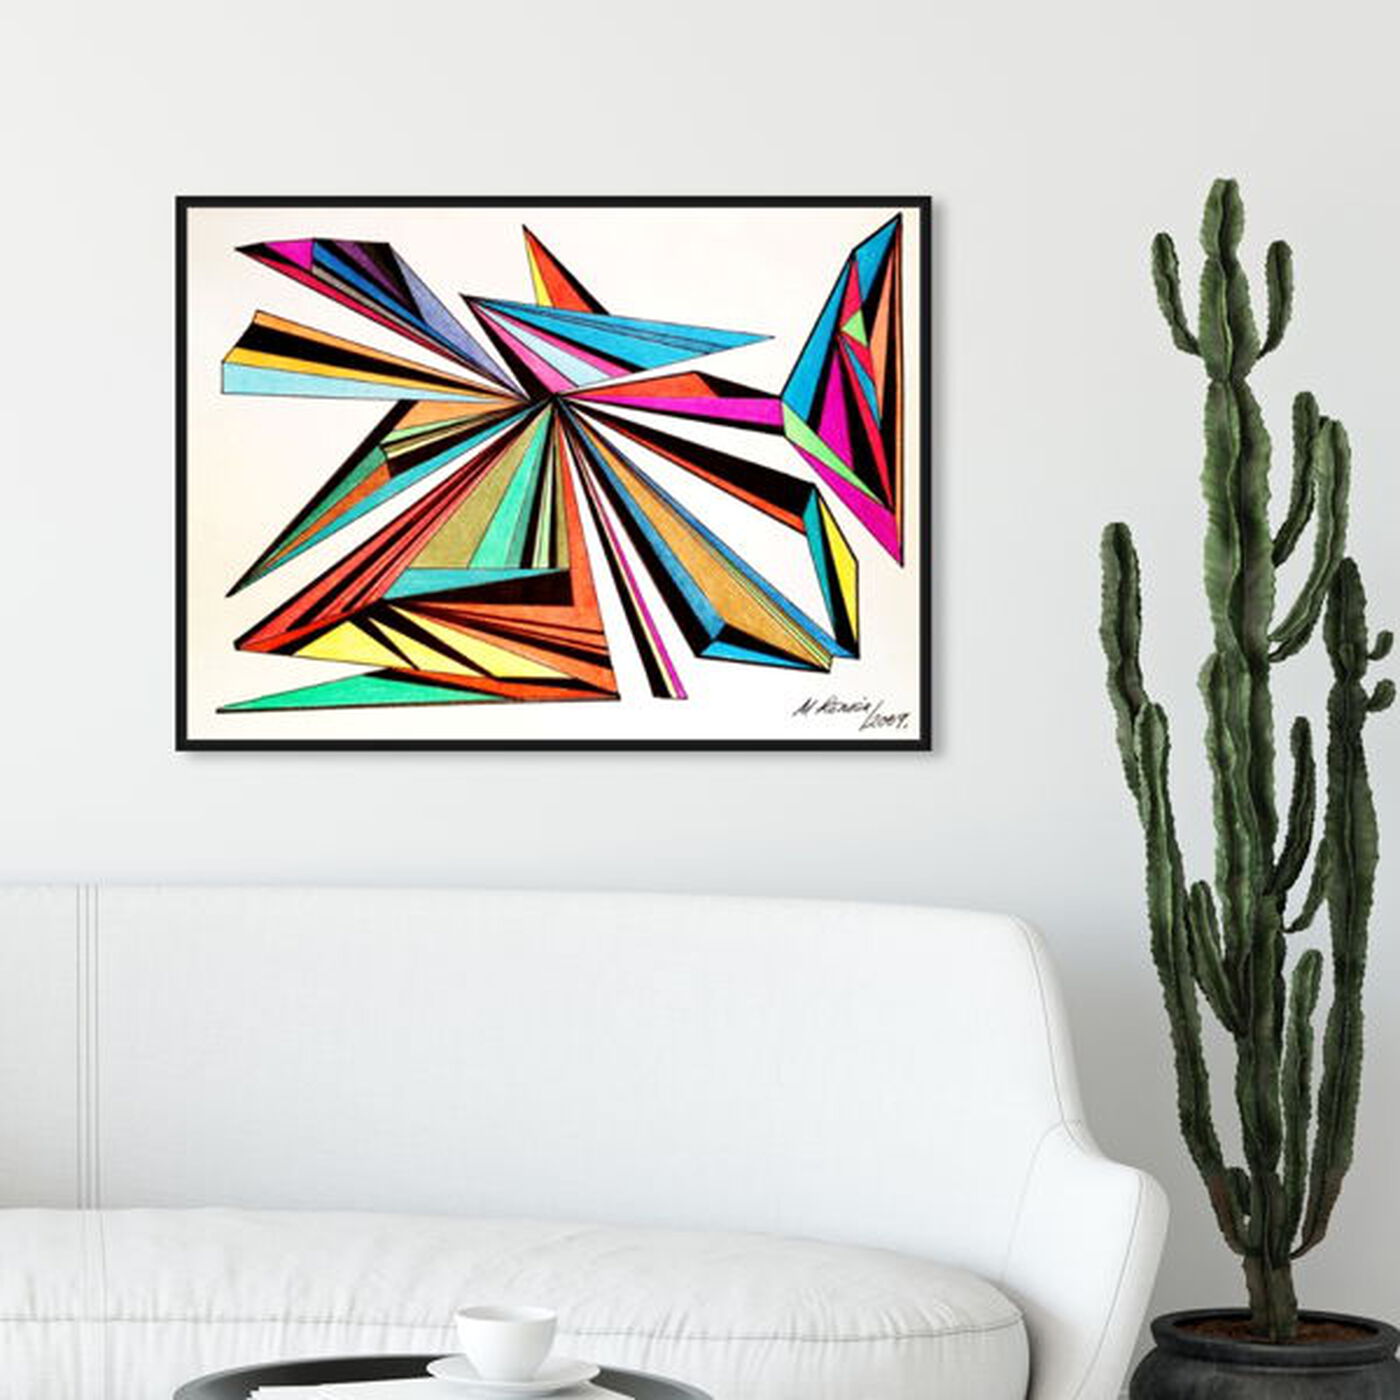 Hanging view of Architecta featuring abstract and geometric art.